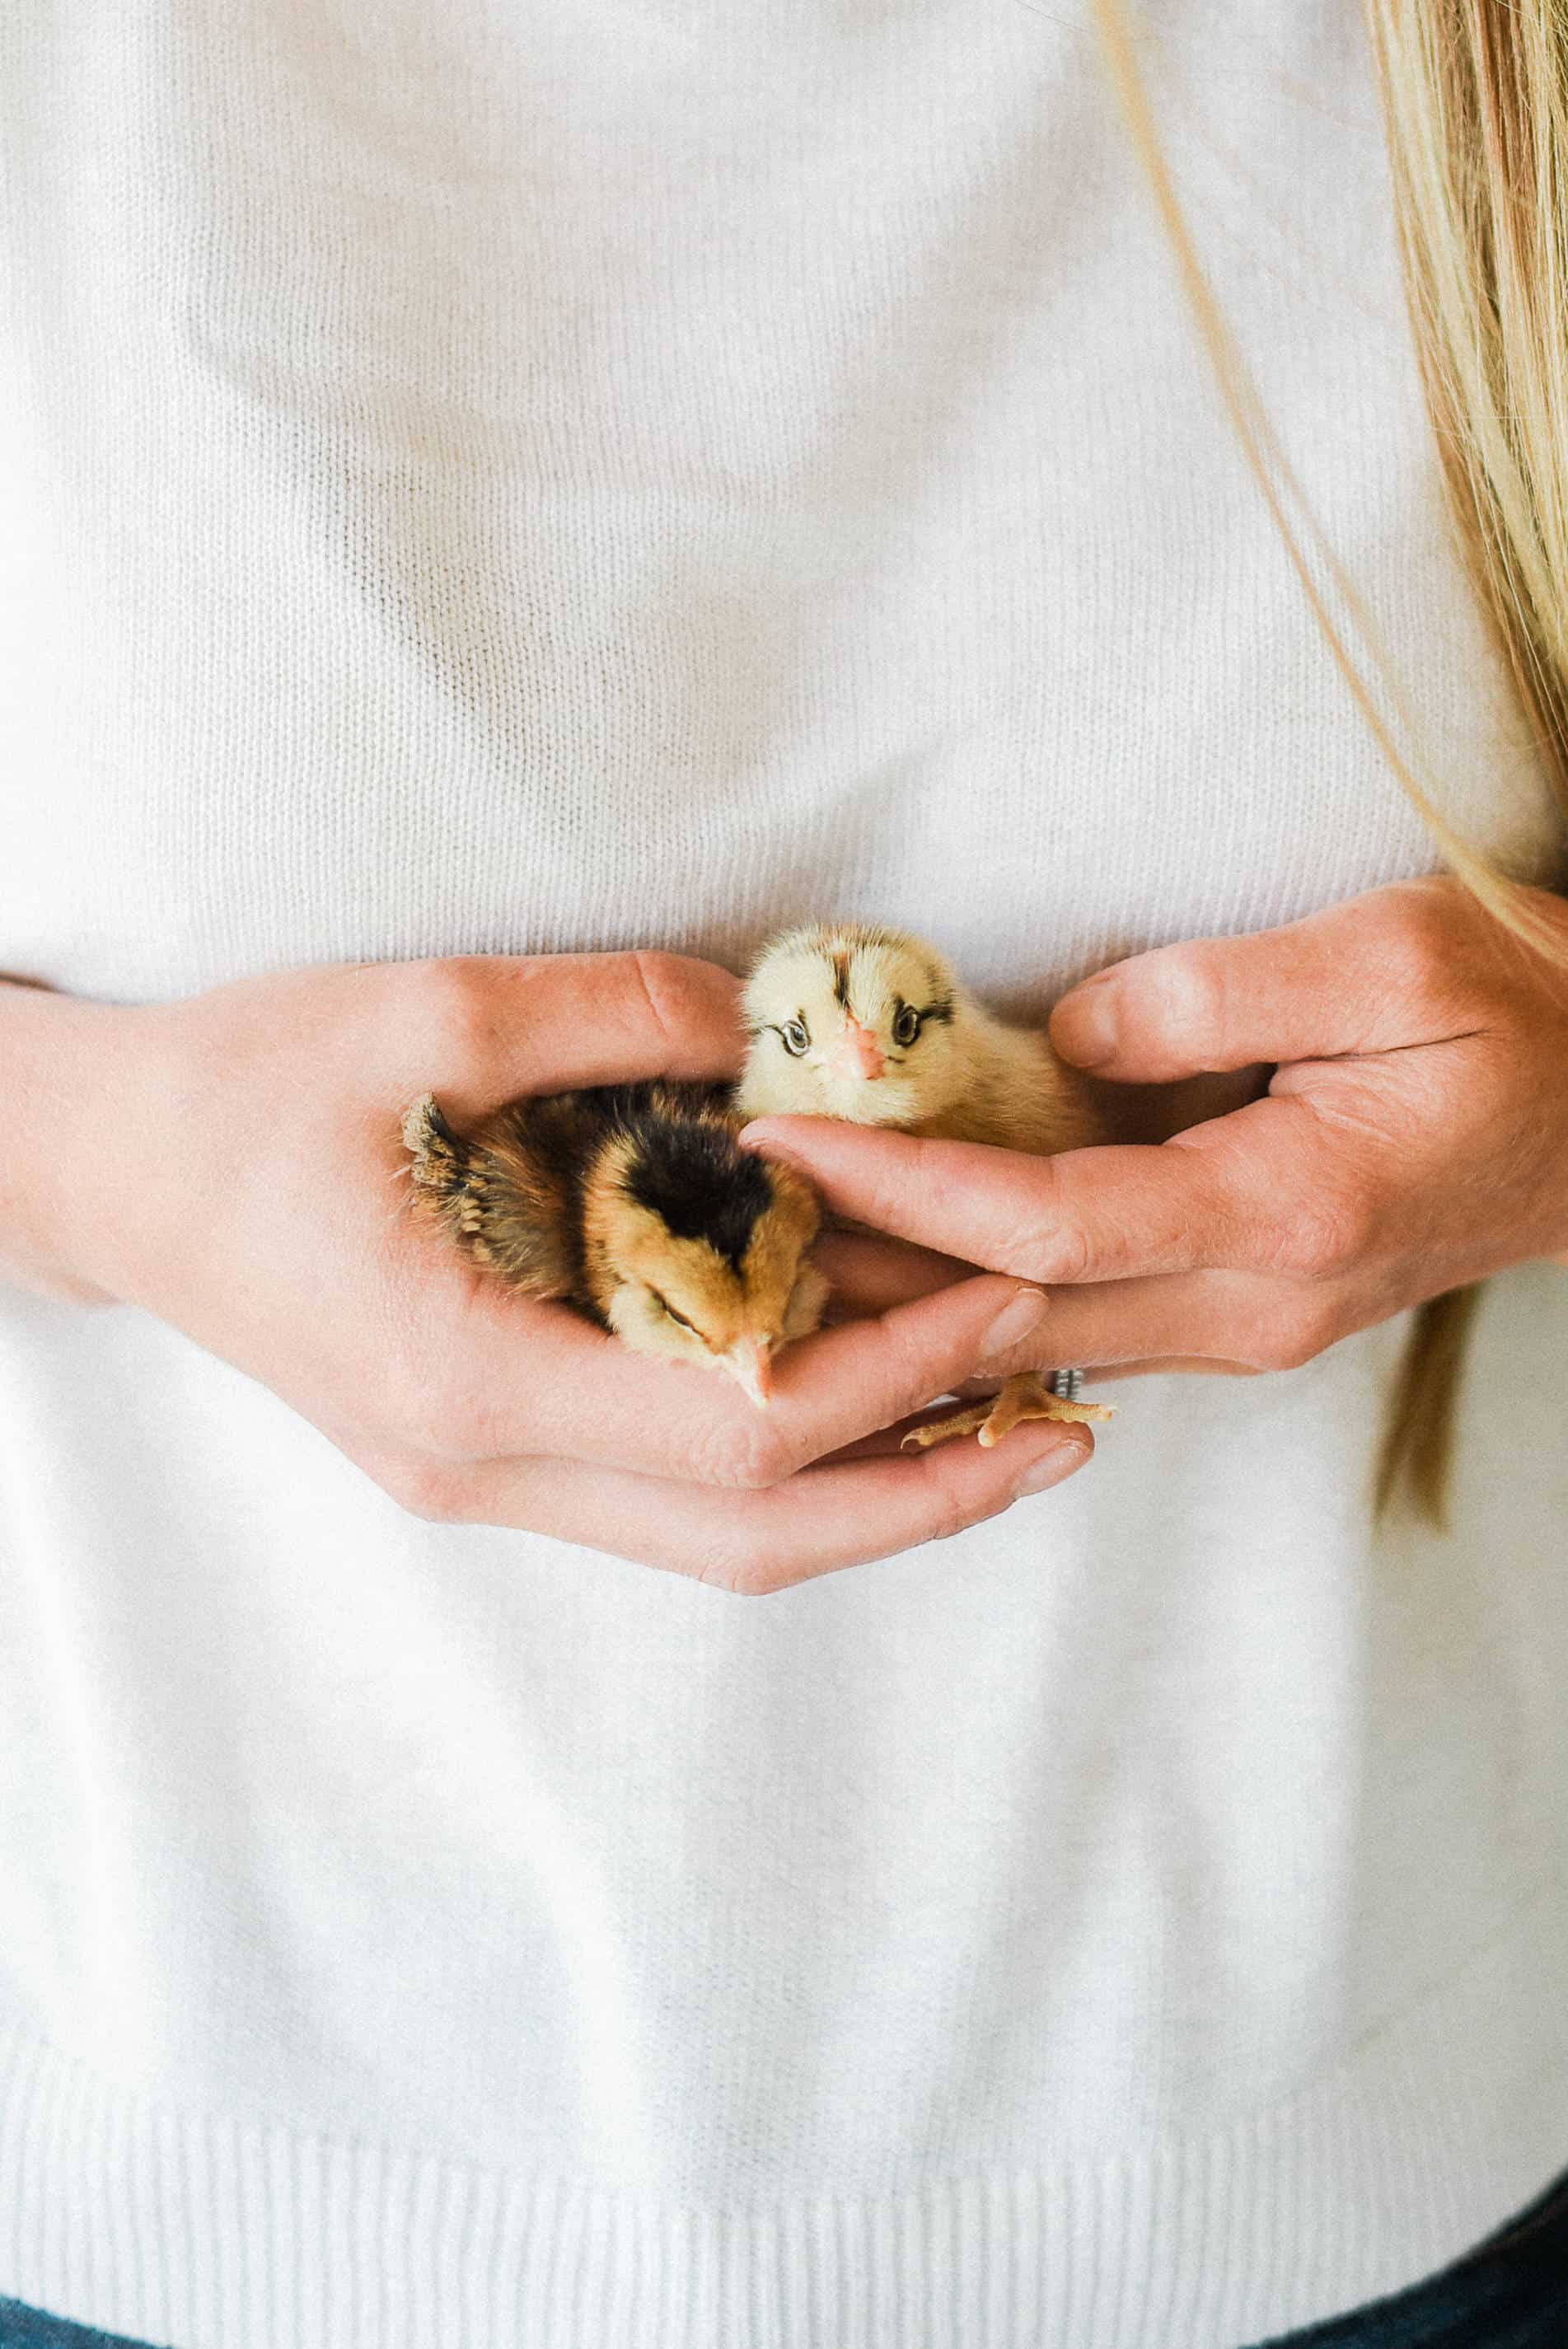 If you plan on raising backyard chickens, chances are, you’ll start with chicks. Here is everything you need to know to begin your backyard chicken journey – starting with raising chicks!